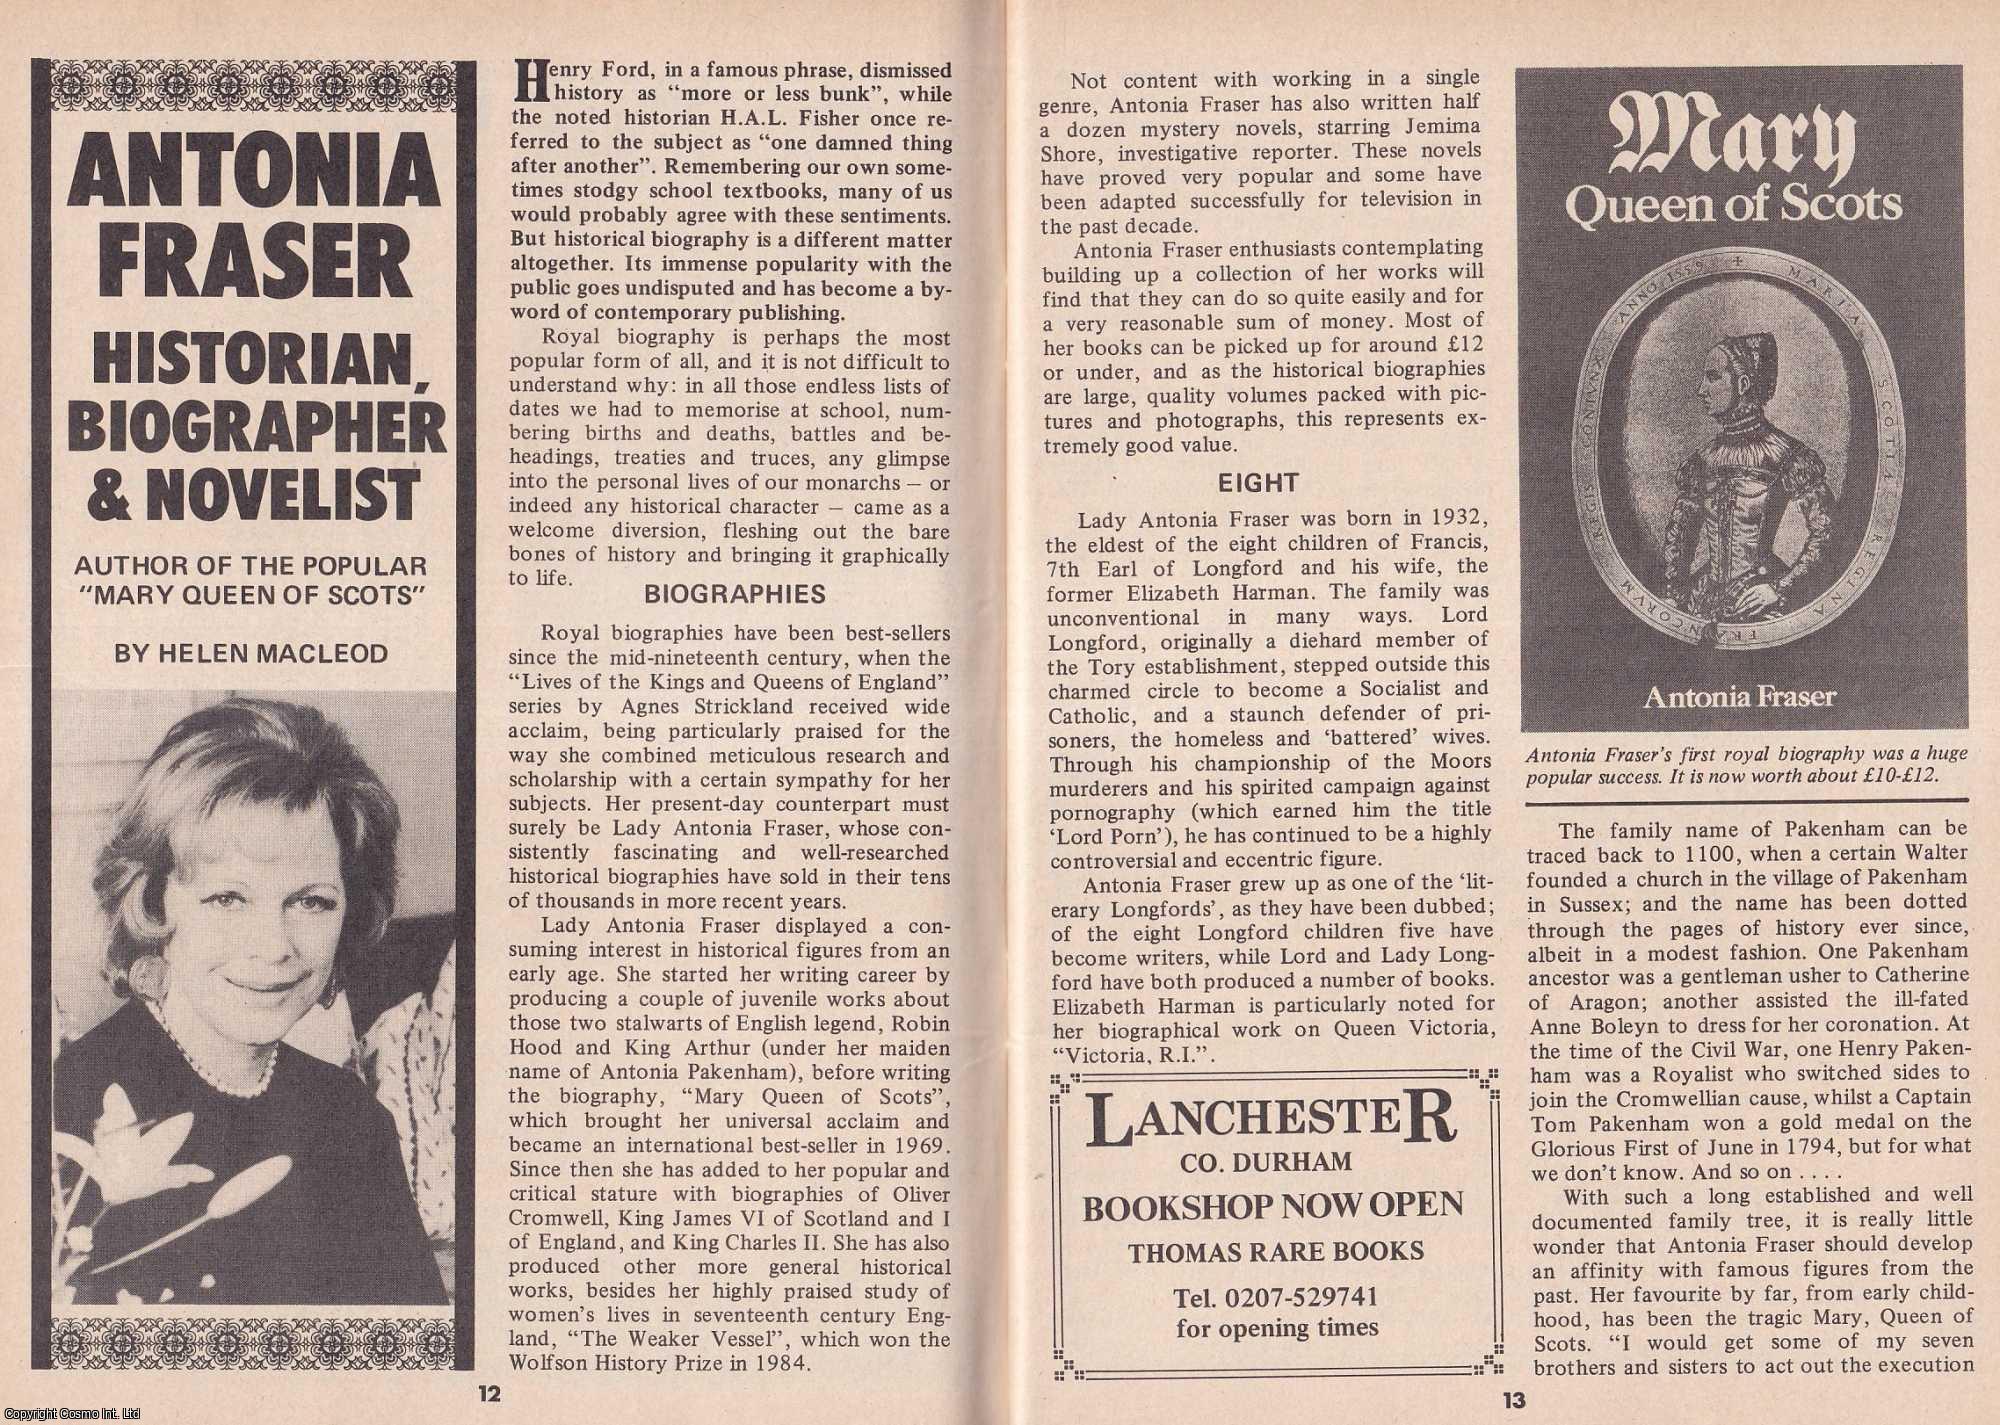 Helen Macleod - Antonia Fraser. Historian, Biographer and Novelist. This is an original article separated from an issue of The Book & Magazine Collector publication.